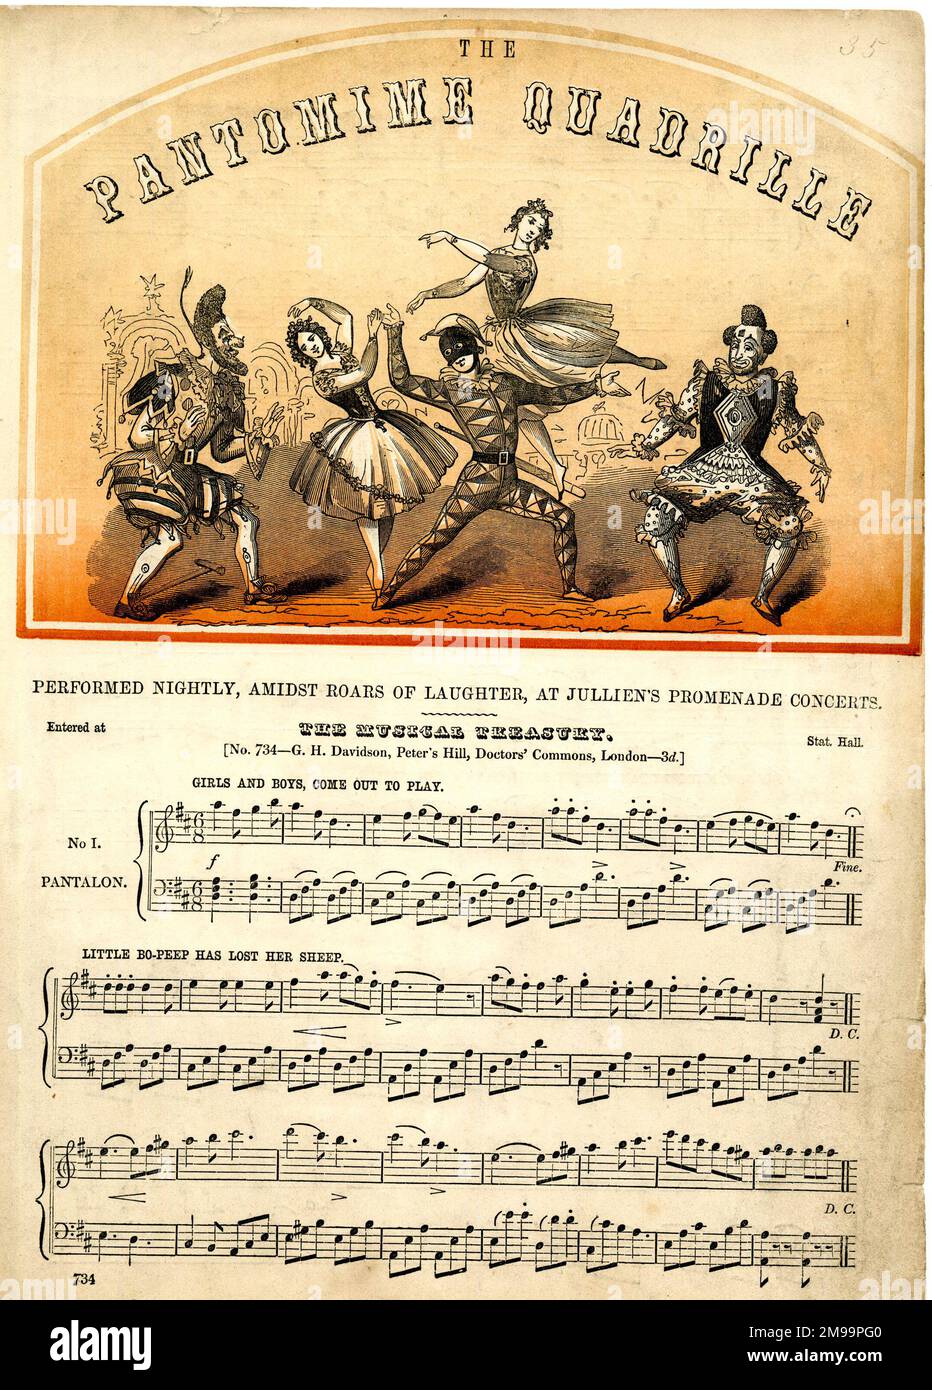 Music cover, The Pantomime Quadrille, performed at Jullien's Promenade Concerts, Theatre Royal, Drury Lane, London. Including music for Girls and Boys Come Out to Play and Little Bo Peep Has Lost Her Sheep. Stock Photo